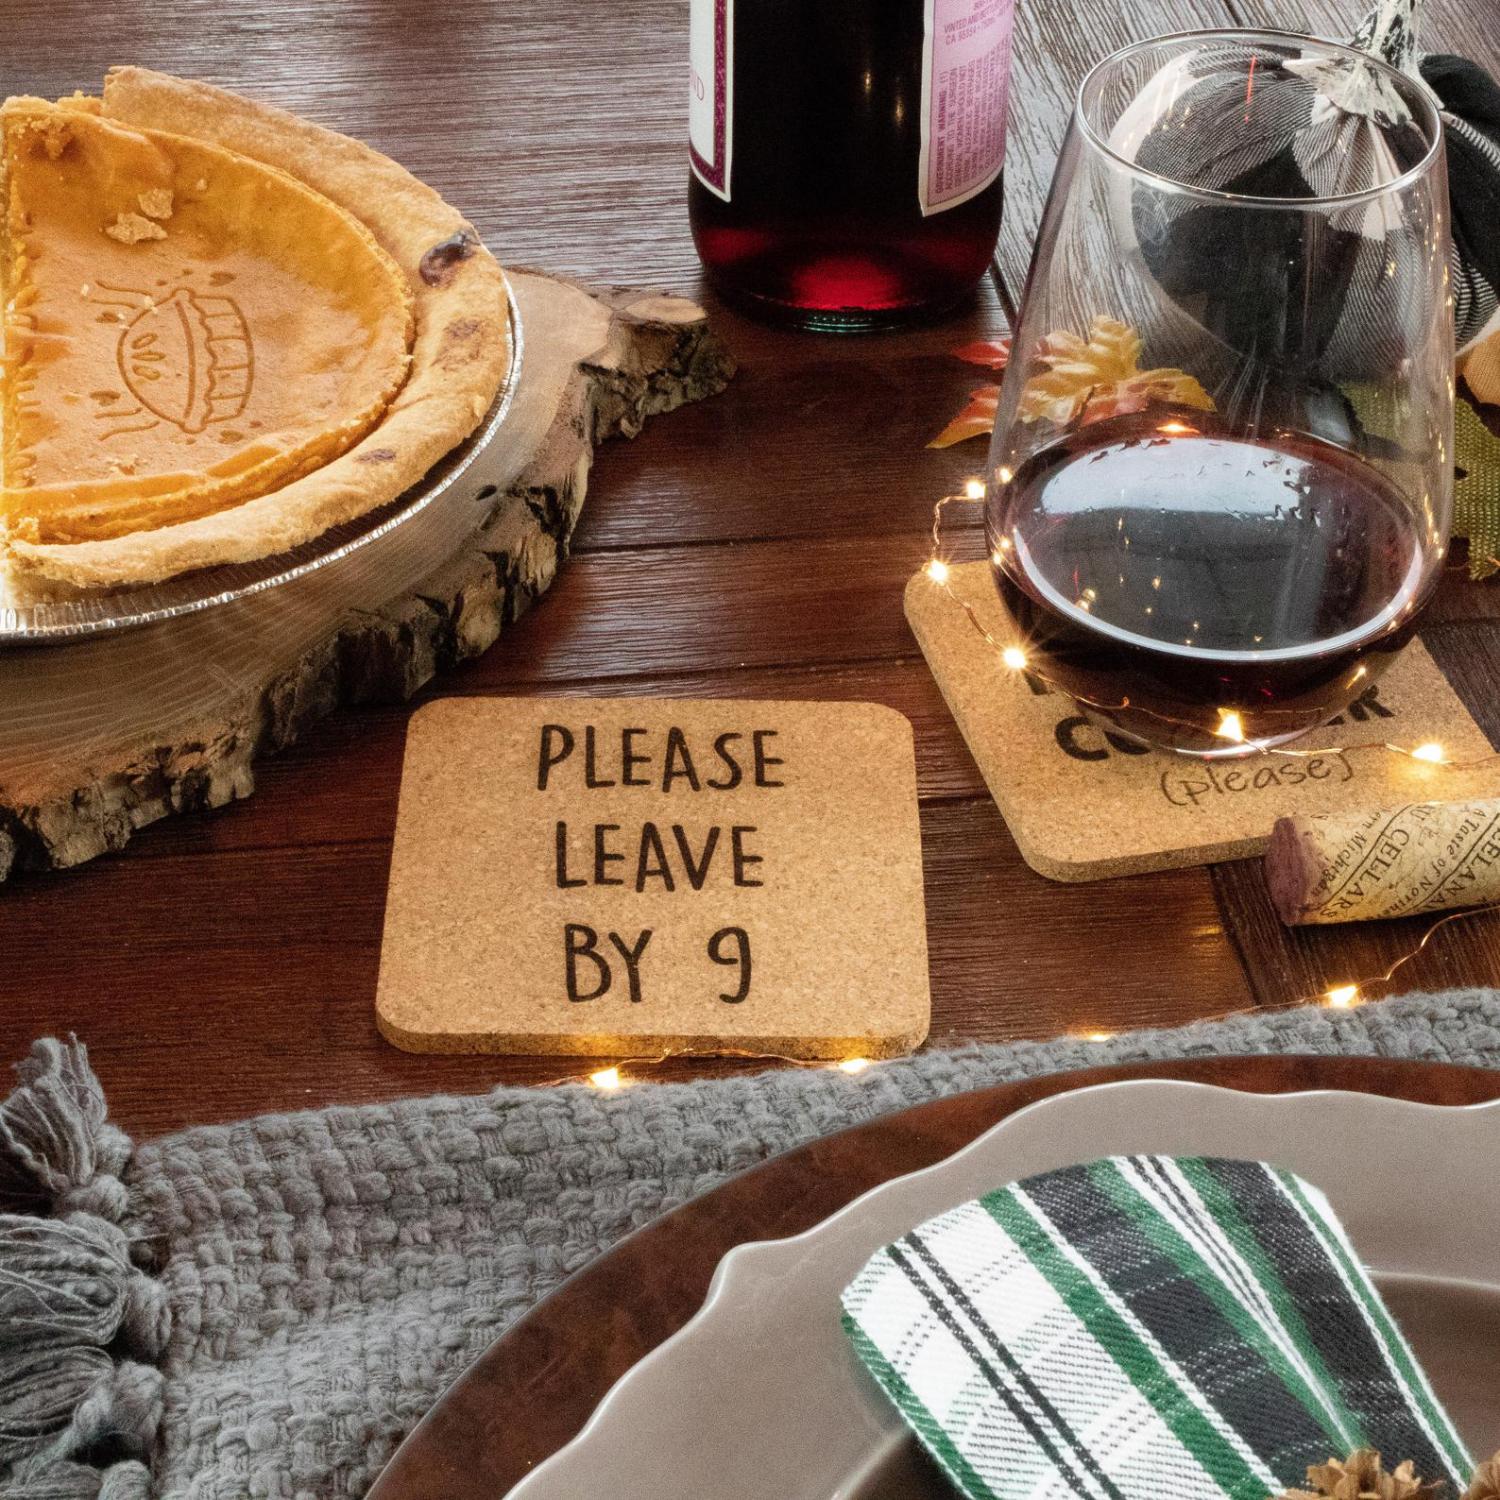 A square-shaped please leave by 9 coasters set on a wooden table along with half pumpkin pie in a pie pan and a less than a half-filled wine glass on the table